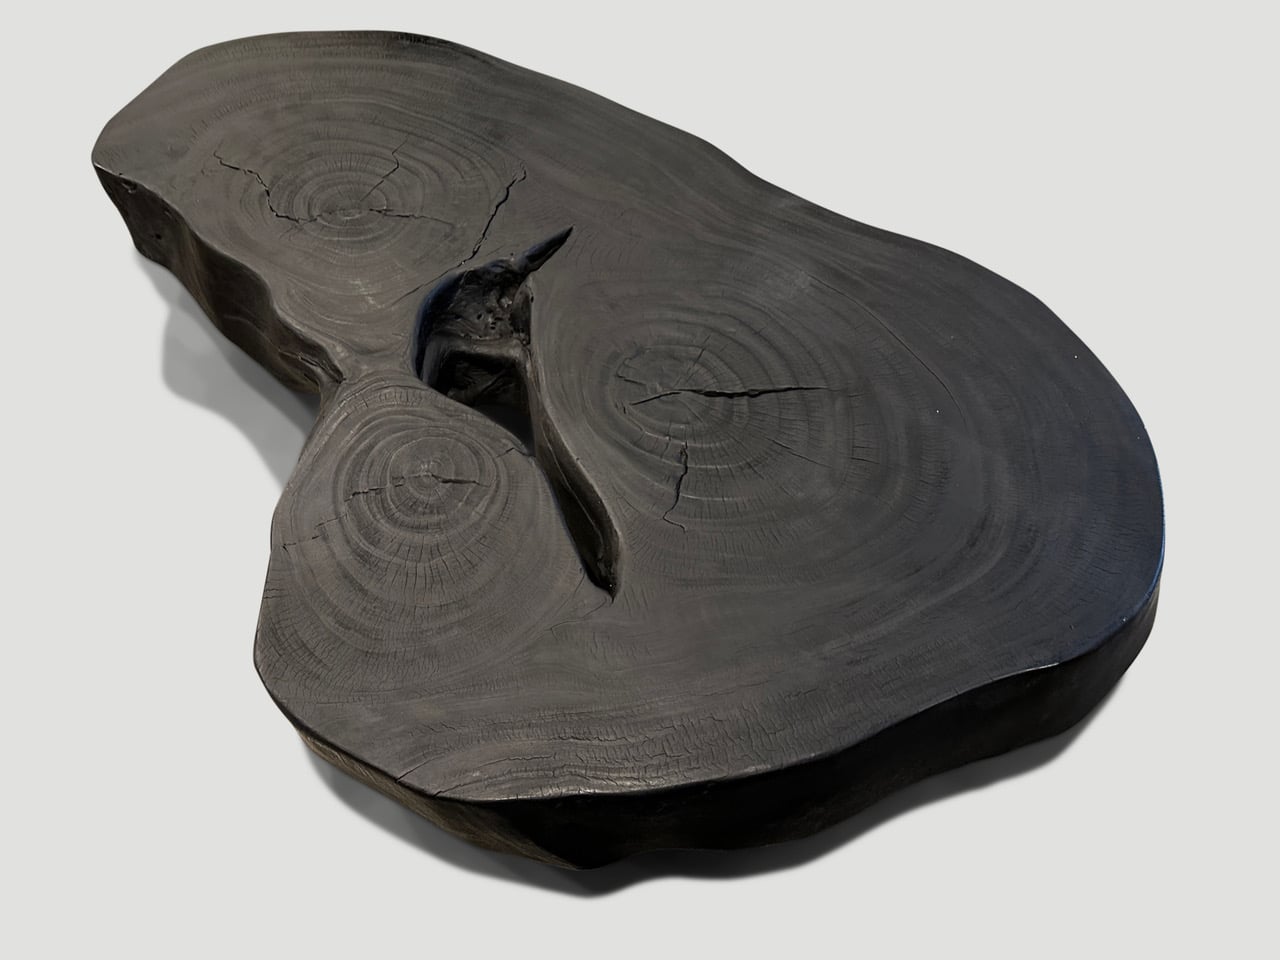 hand carved reclaimed suar wood coffee table